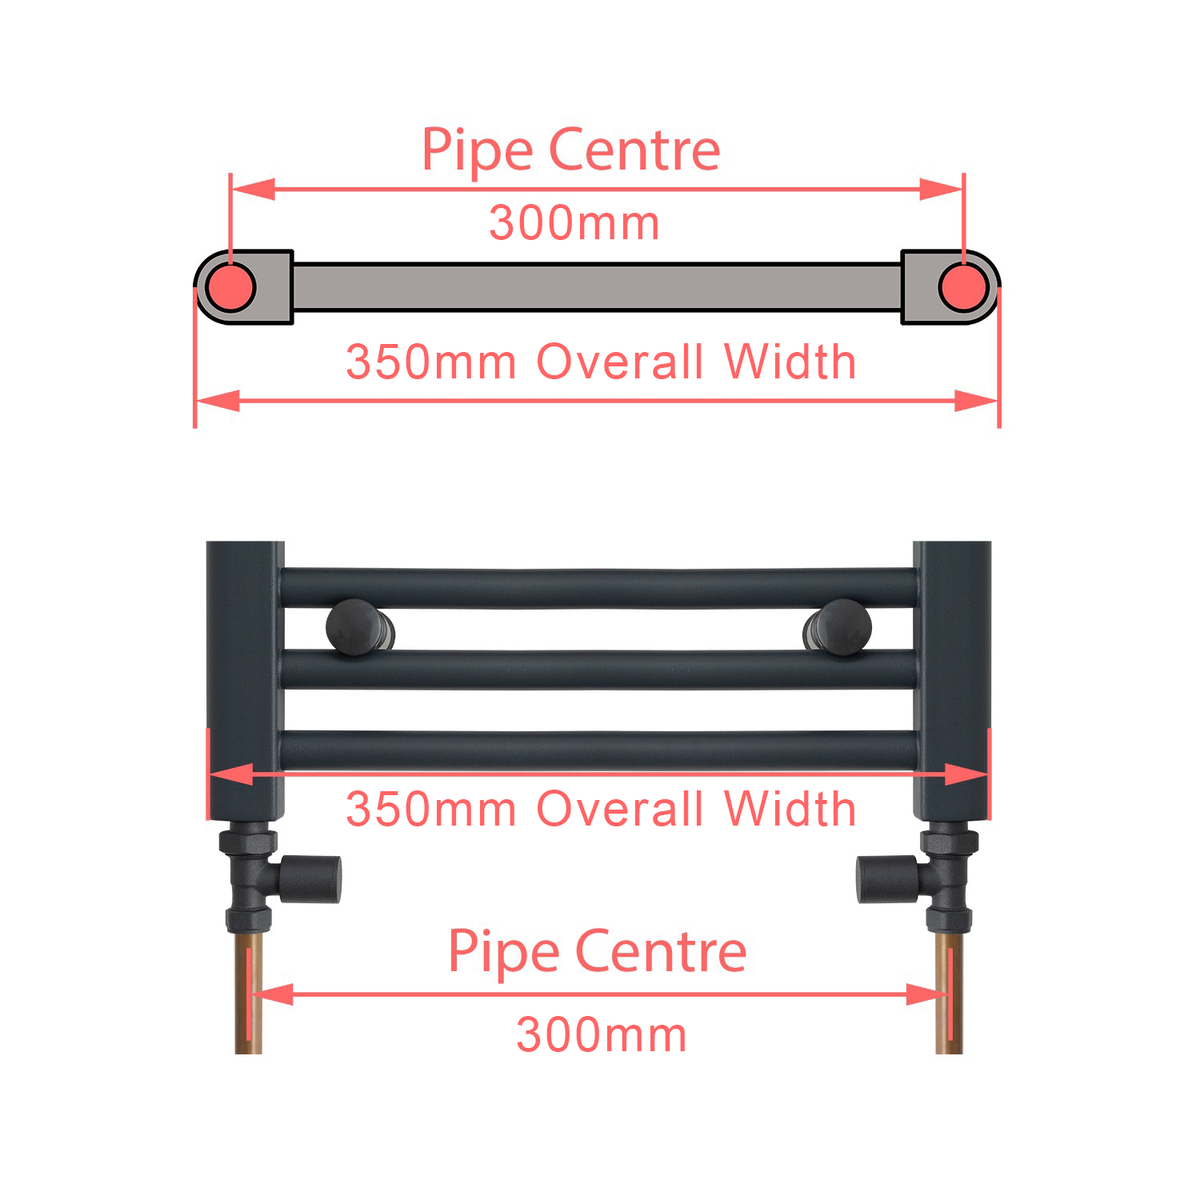 350mm wide pipe center